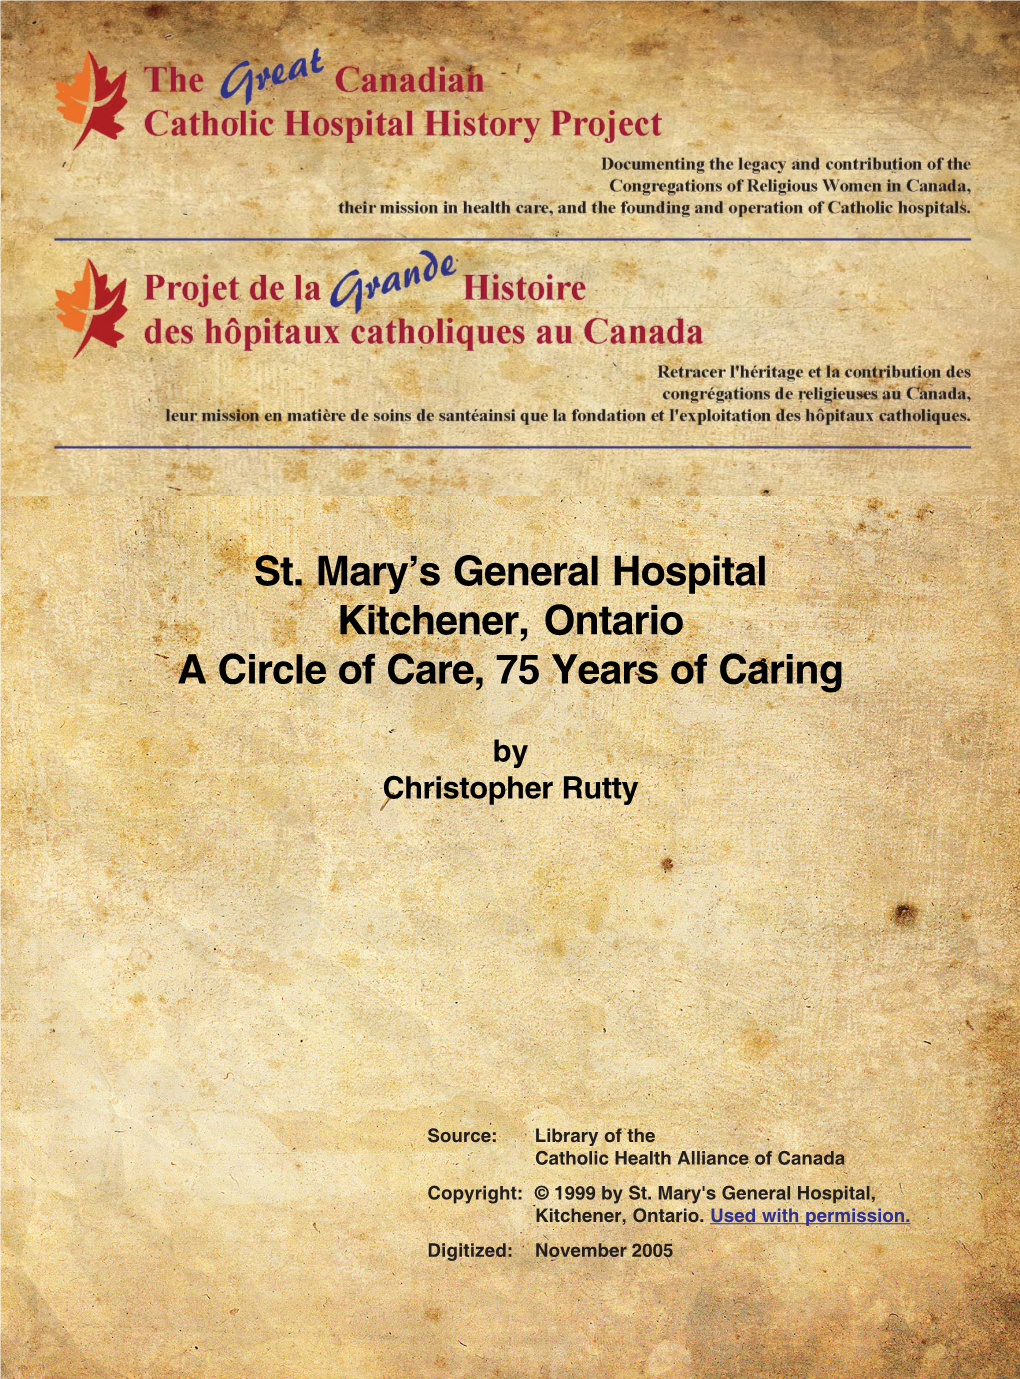 St. Mary's General Hospital Kitchener, Ontario a Circle of Care, 75 Years